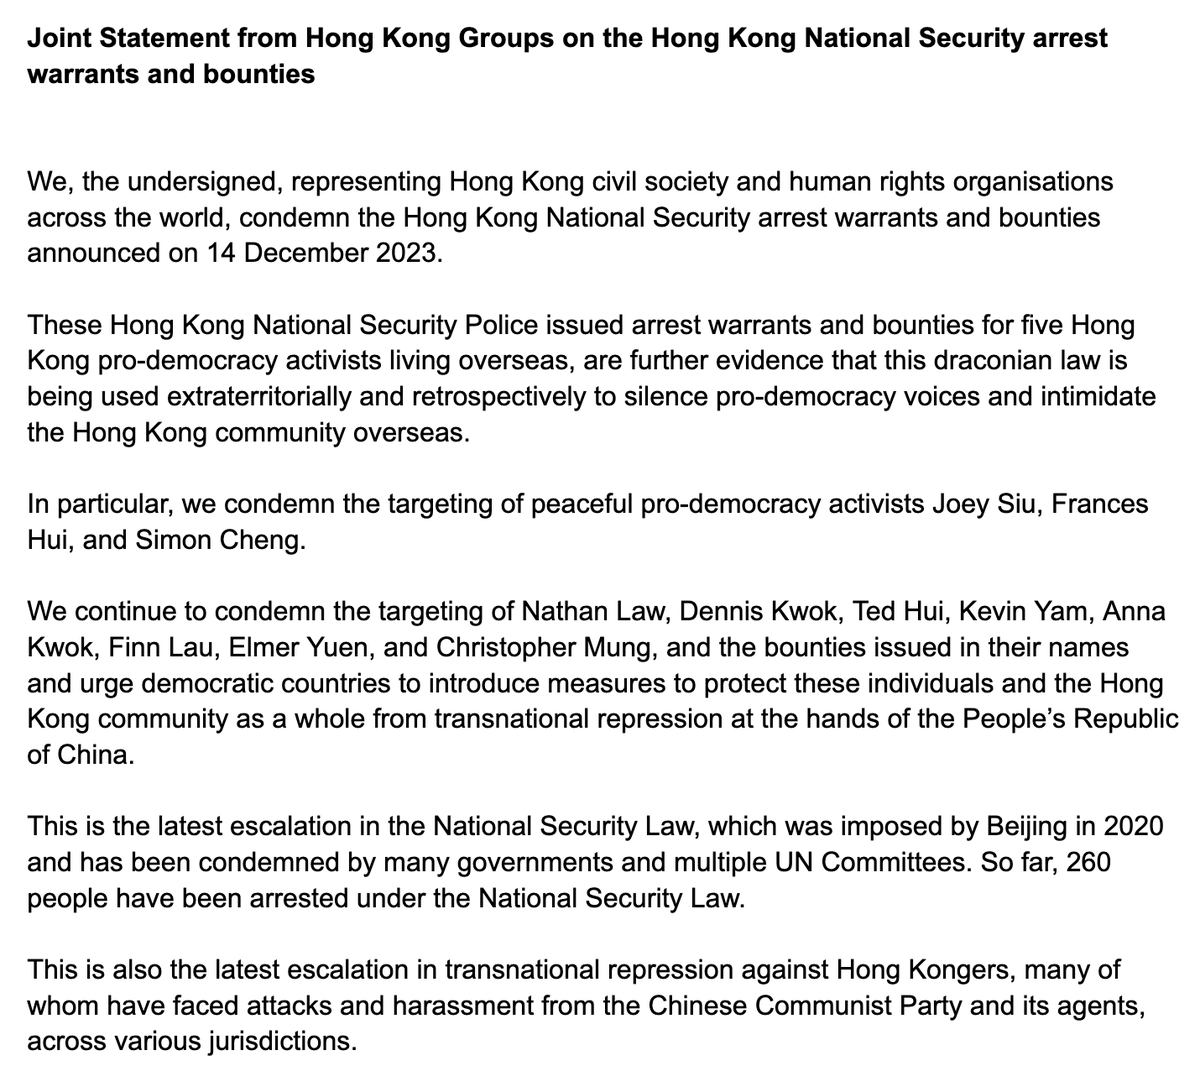 HKDC joins 79 #HongKong groups & allies in condemning the national security arrest warrants & bounties for 5 overseas HKers as well as the previous ones against 8 in July. We urge governments to protect the rights & freedoms of HK activists in exile. static1.squarespace.com/static/58ecfa8…